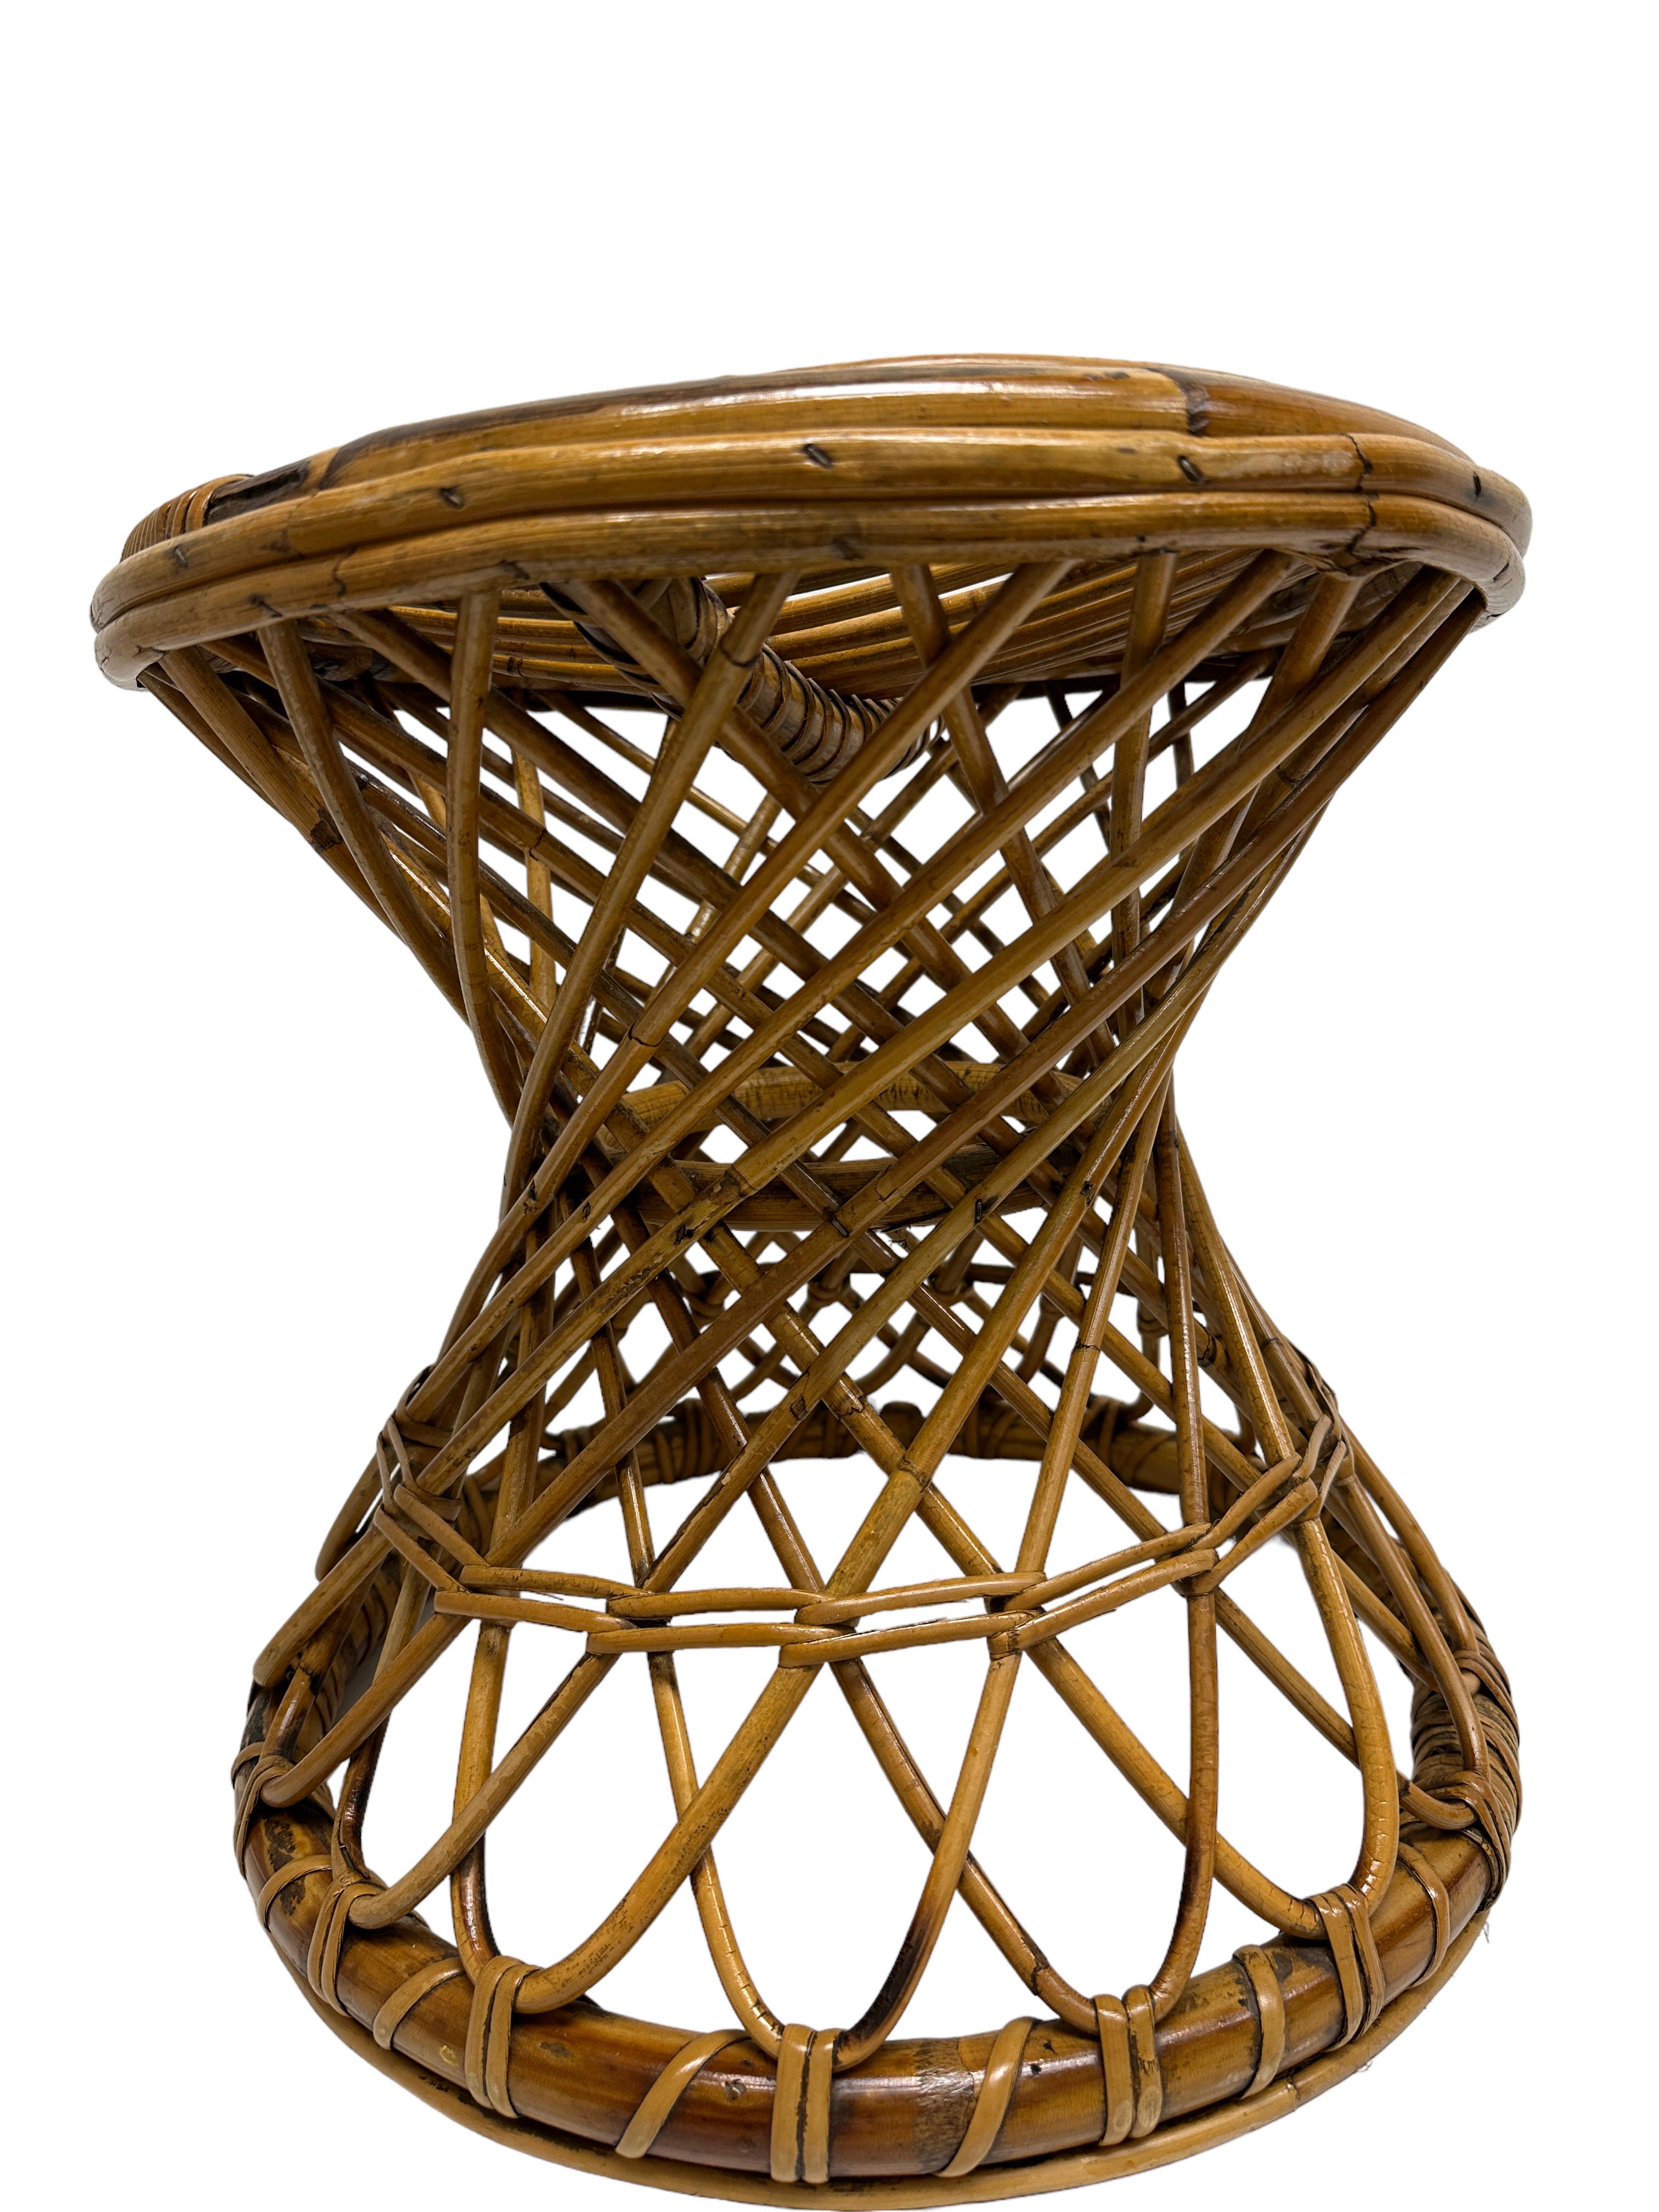 Vivai del Sud Bamboo Rattan Decorative Side table Flower Pot Stand or Seat In Good Condition For Sale In Nuernberg, DE